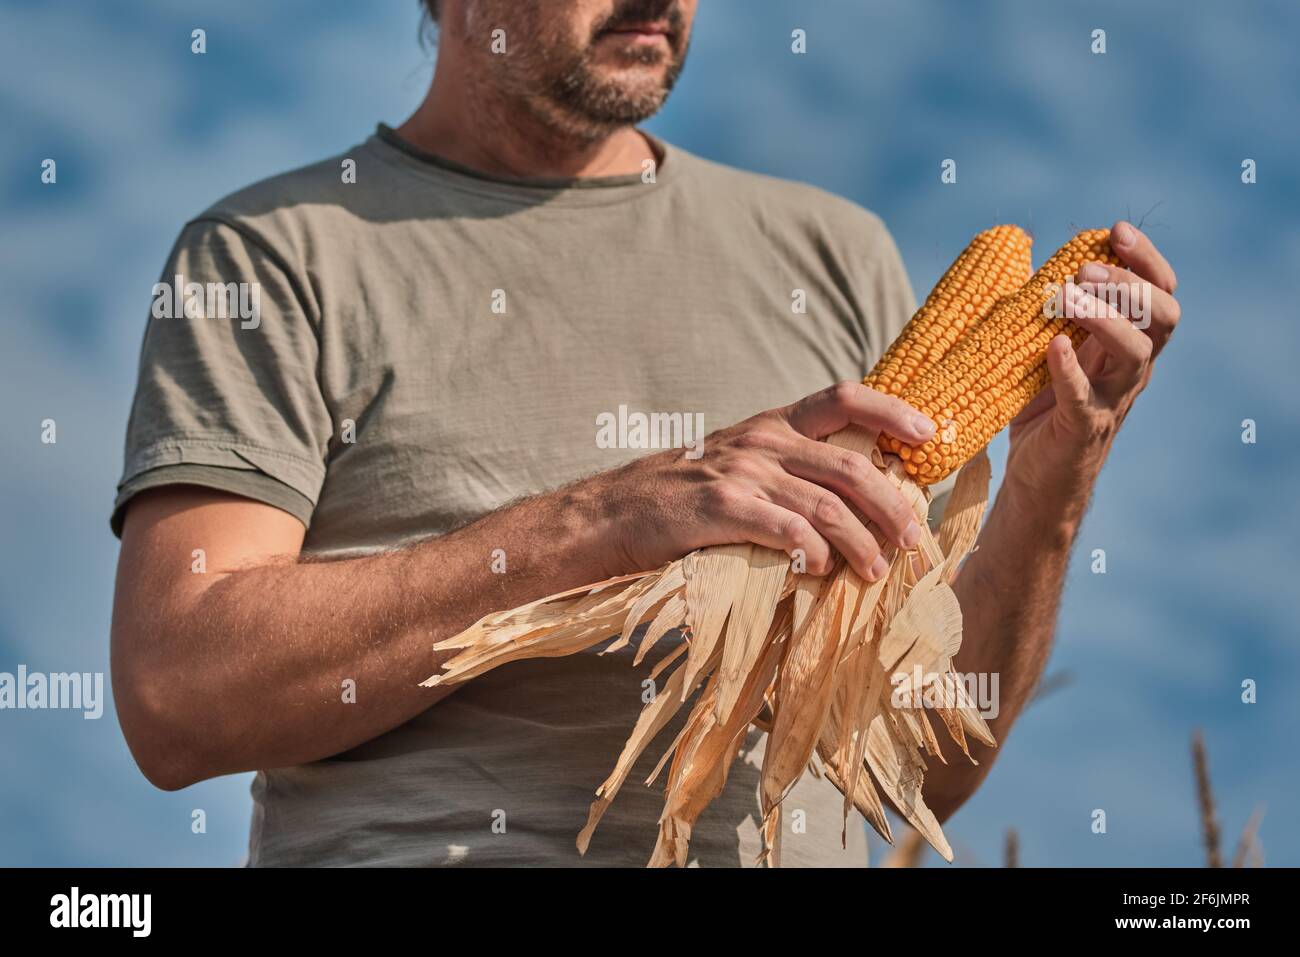 Farmer holding harvested corn on the cob in agricultural field, portrait of male farm worker during successful harvest of maize crops Stock Photo